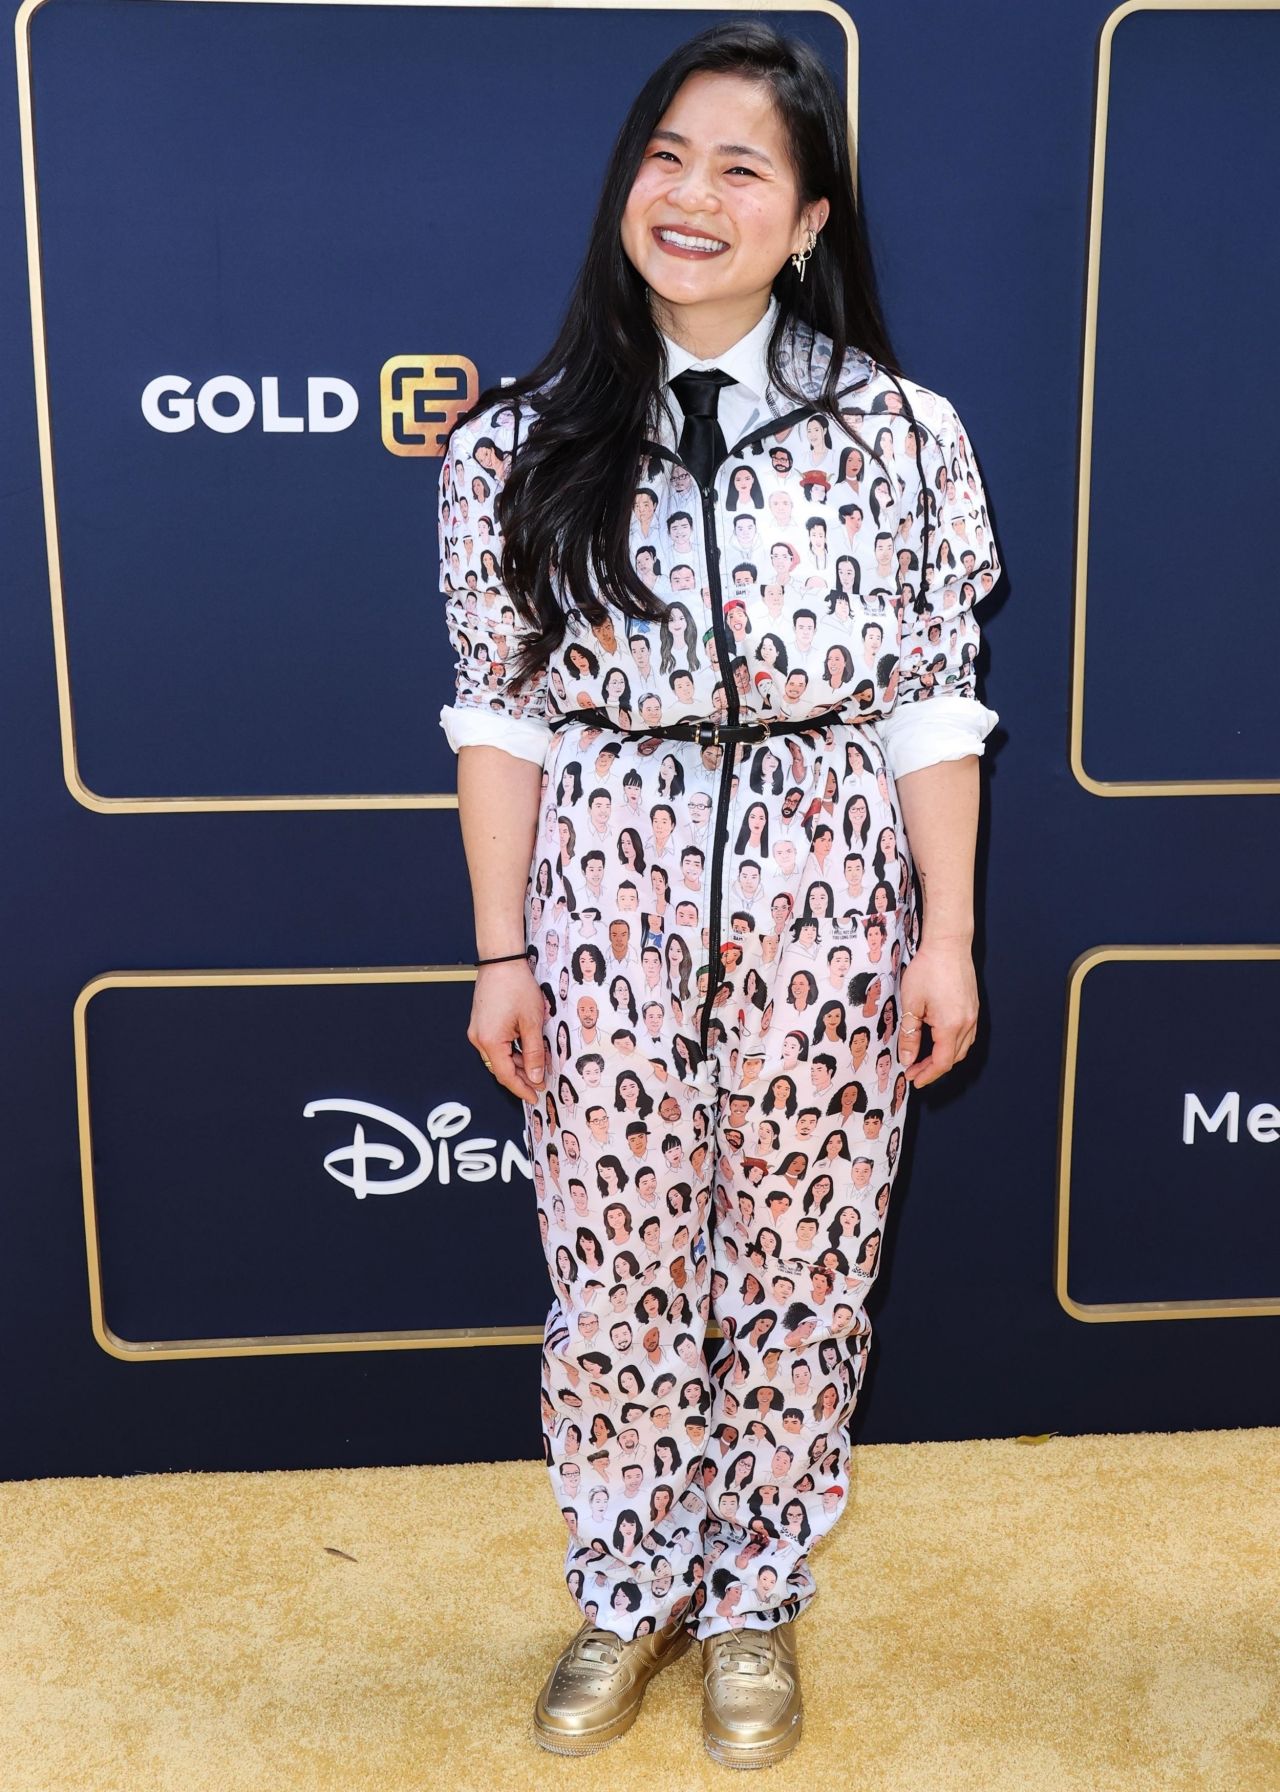 Kelly Marie Tran Kelly-marie-tran-gold-house-s-inaugural-gold-gala-2022-in-los-angeles-05-21-2022-6